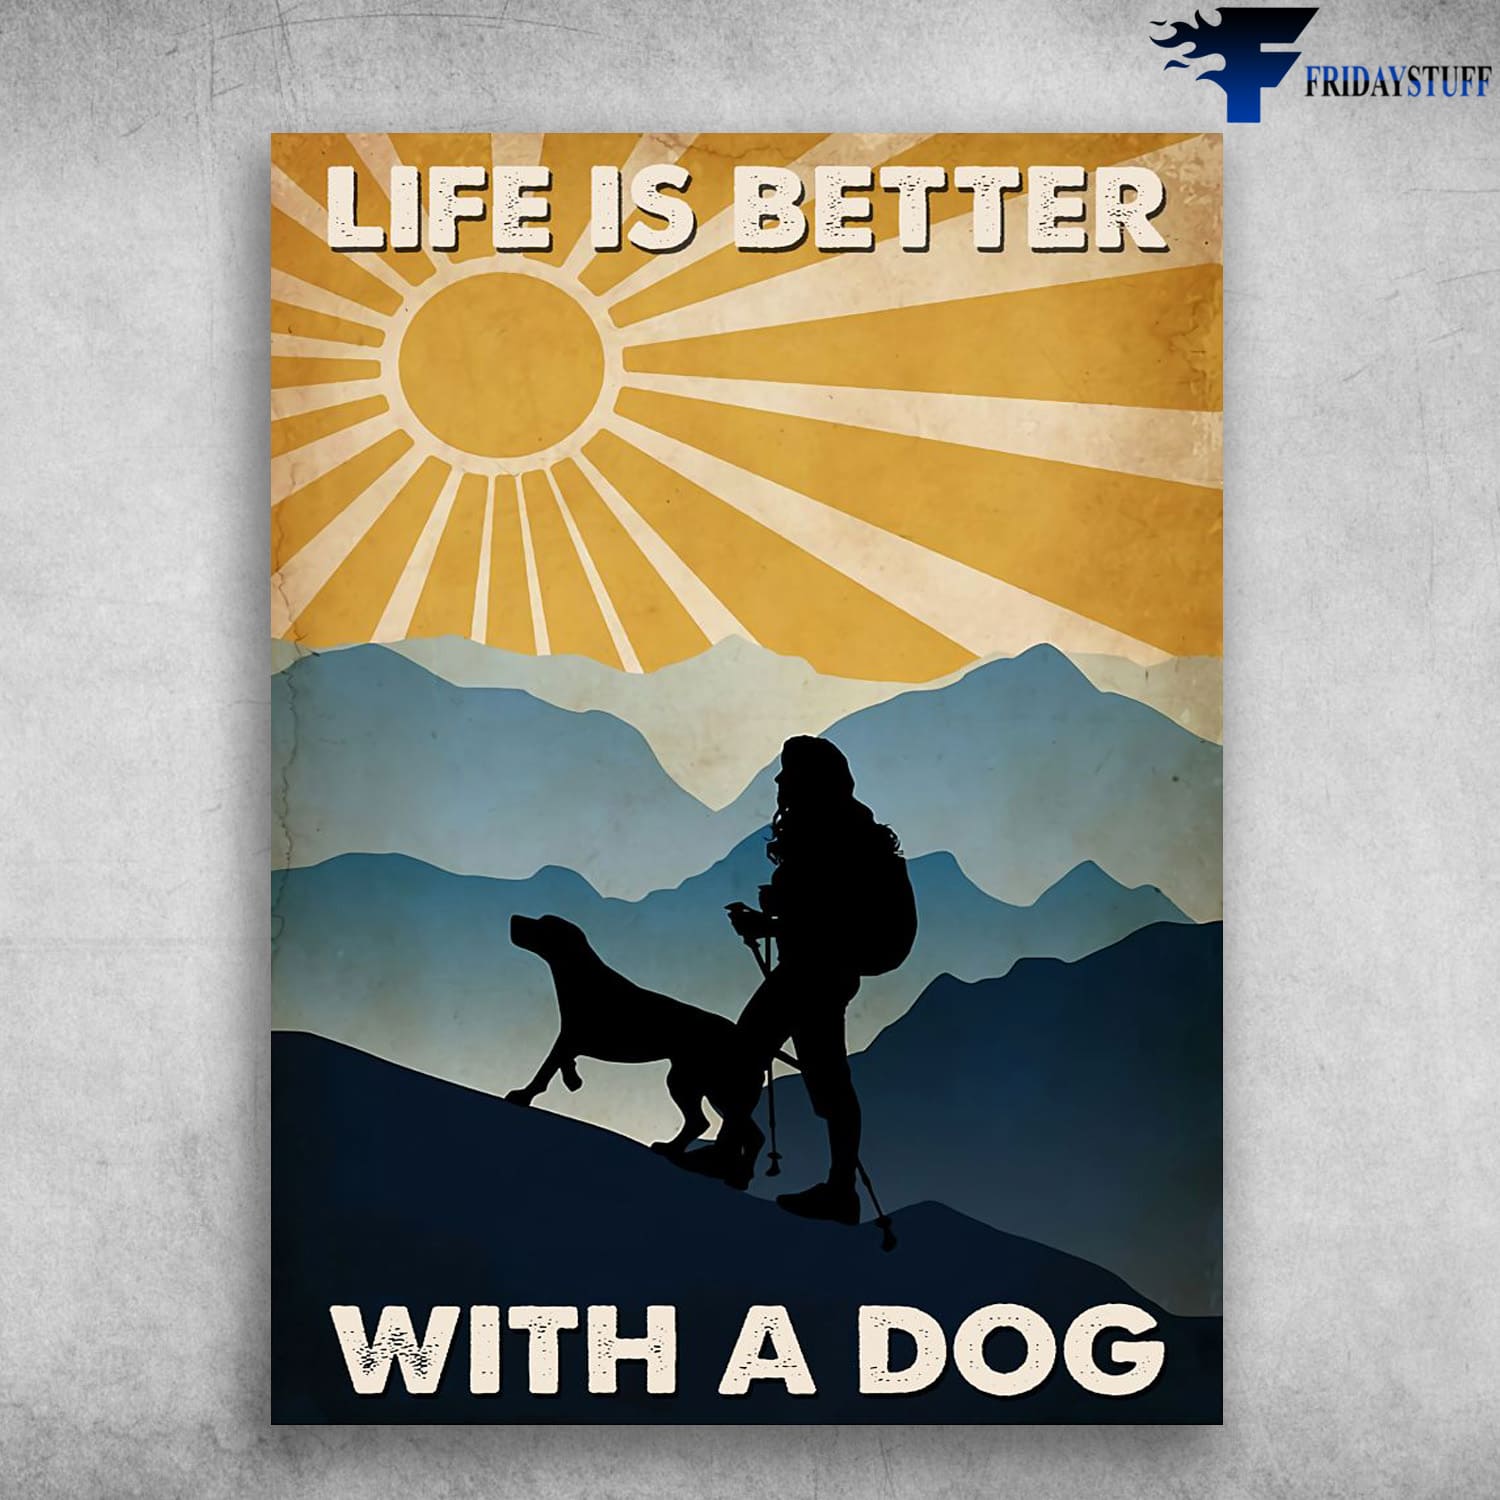 Hiking Poster, Mountain Hiking, Hiking With Dog, Life Is Better, With A Dog